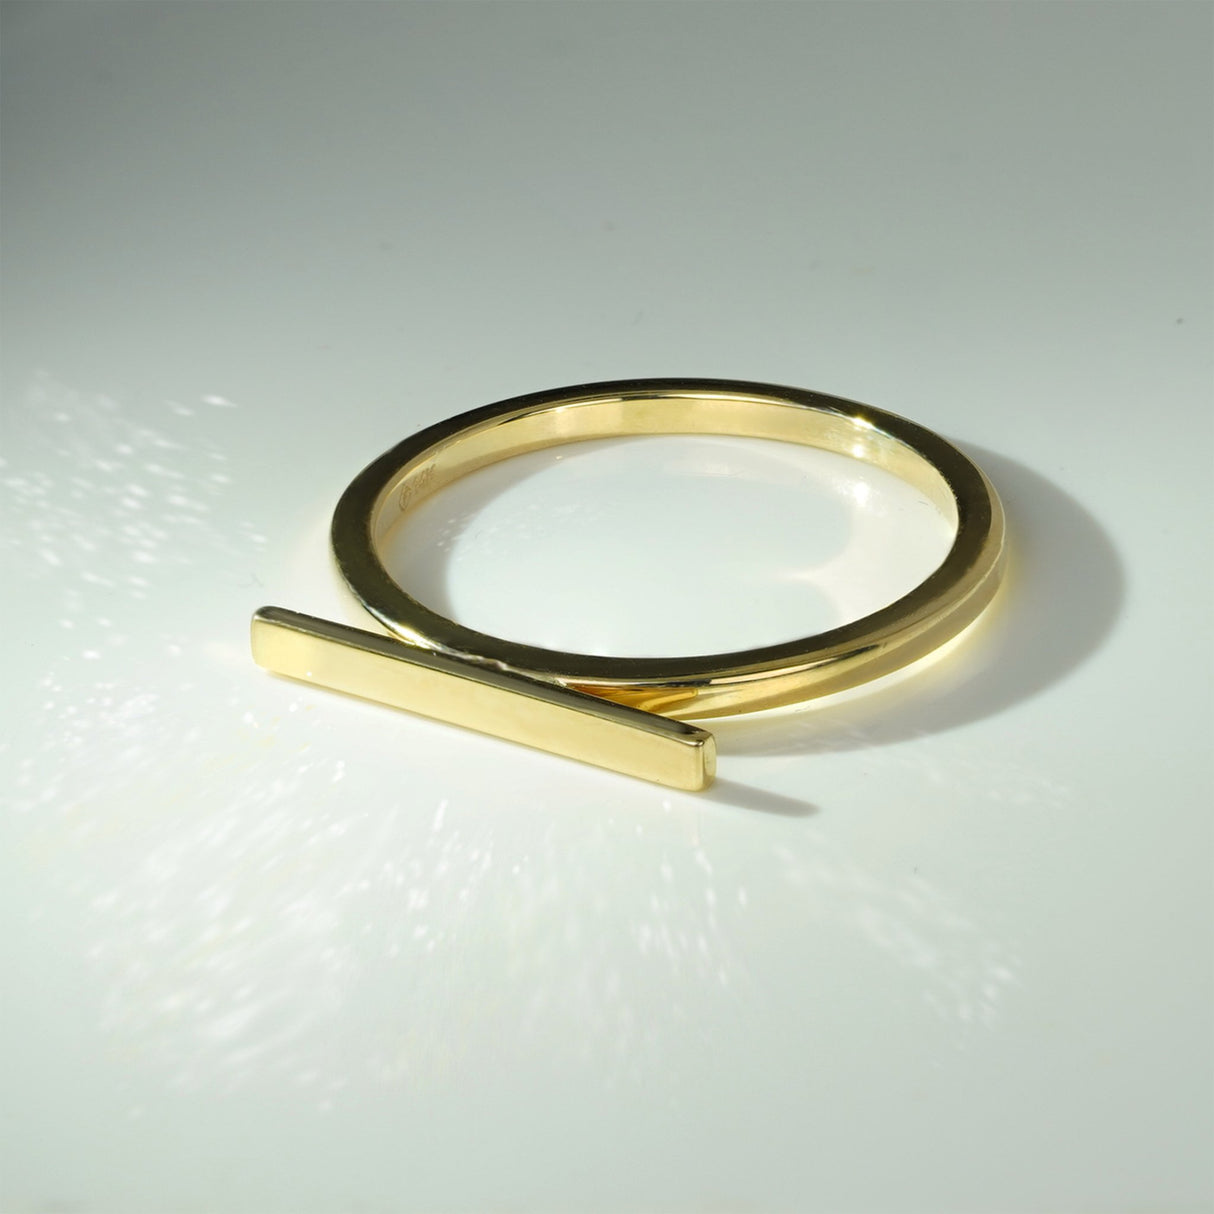 A minimalist yet striking 2mm gold ring with a horizontal bar, a symbol of strength and stability, offering an understated touch of luxury, gold stackable ring, gold stackable rings, gold ring, gold rings, 14K gold ring, 14K gold rings, gold fashion ring,